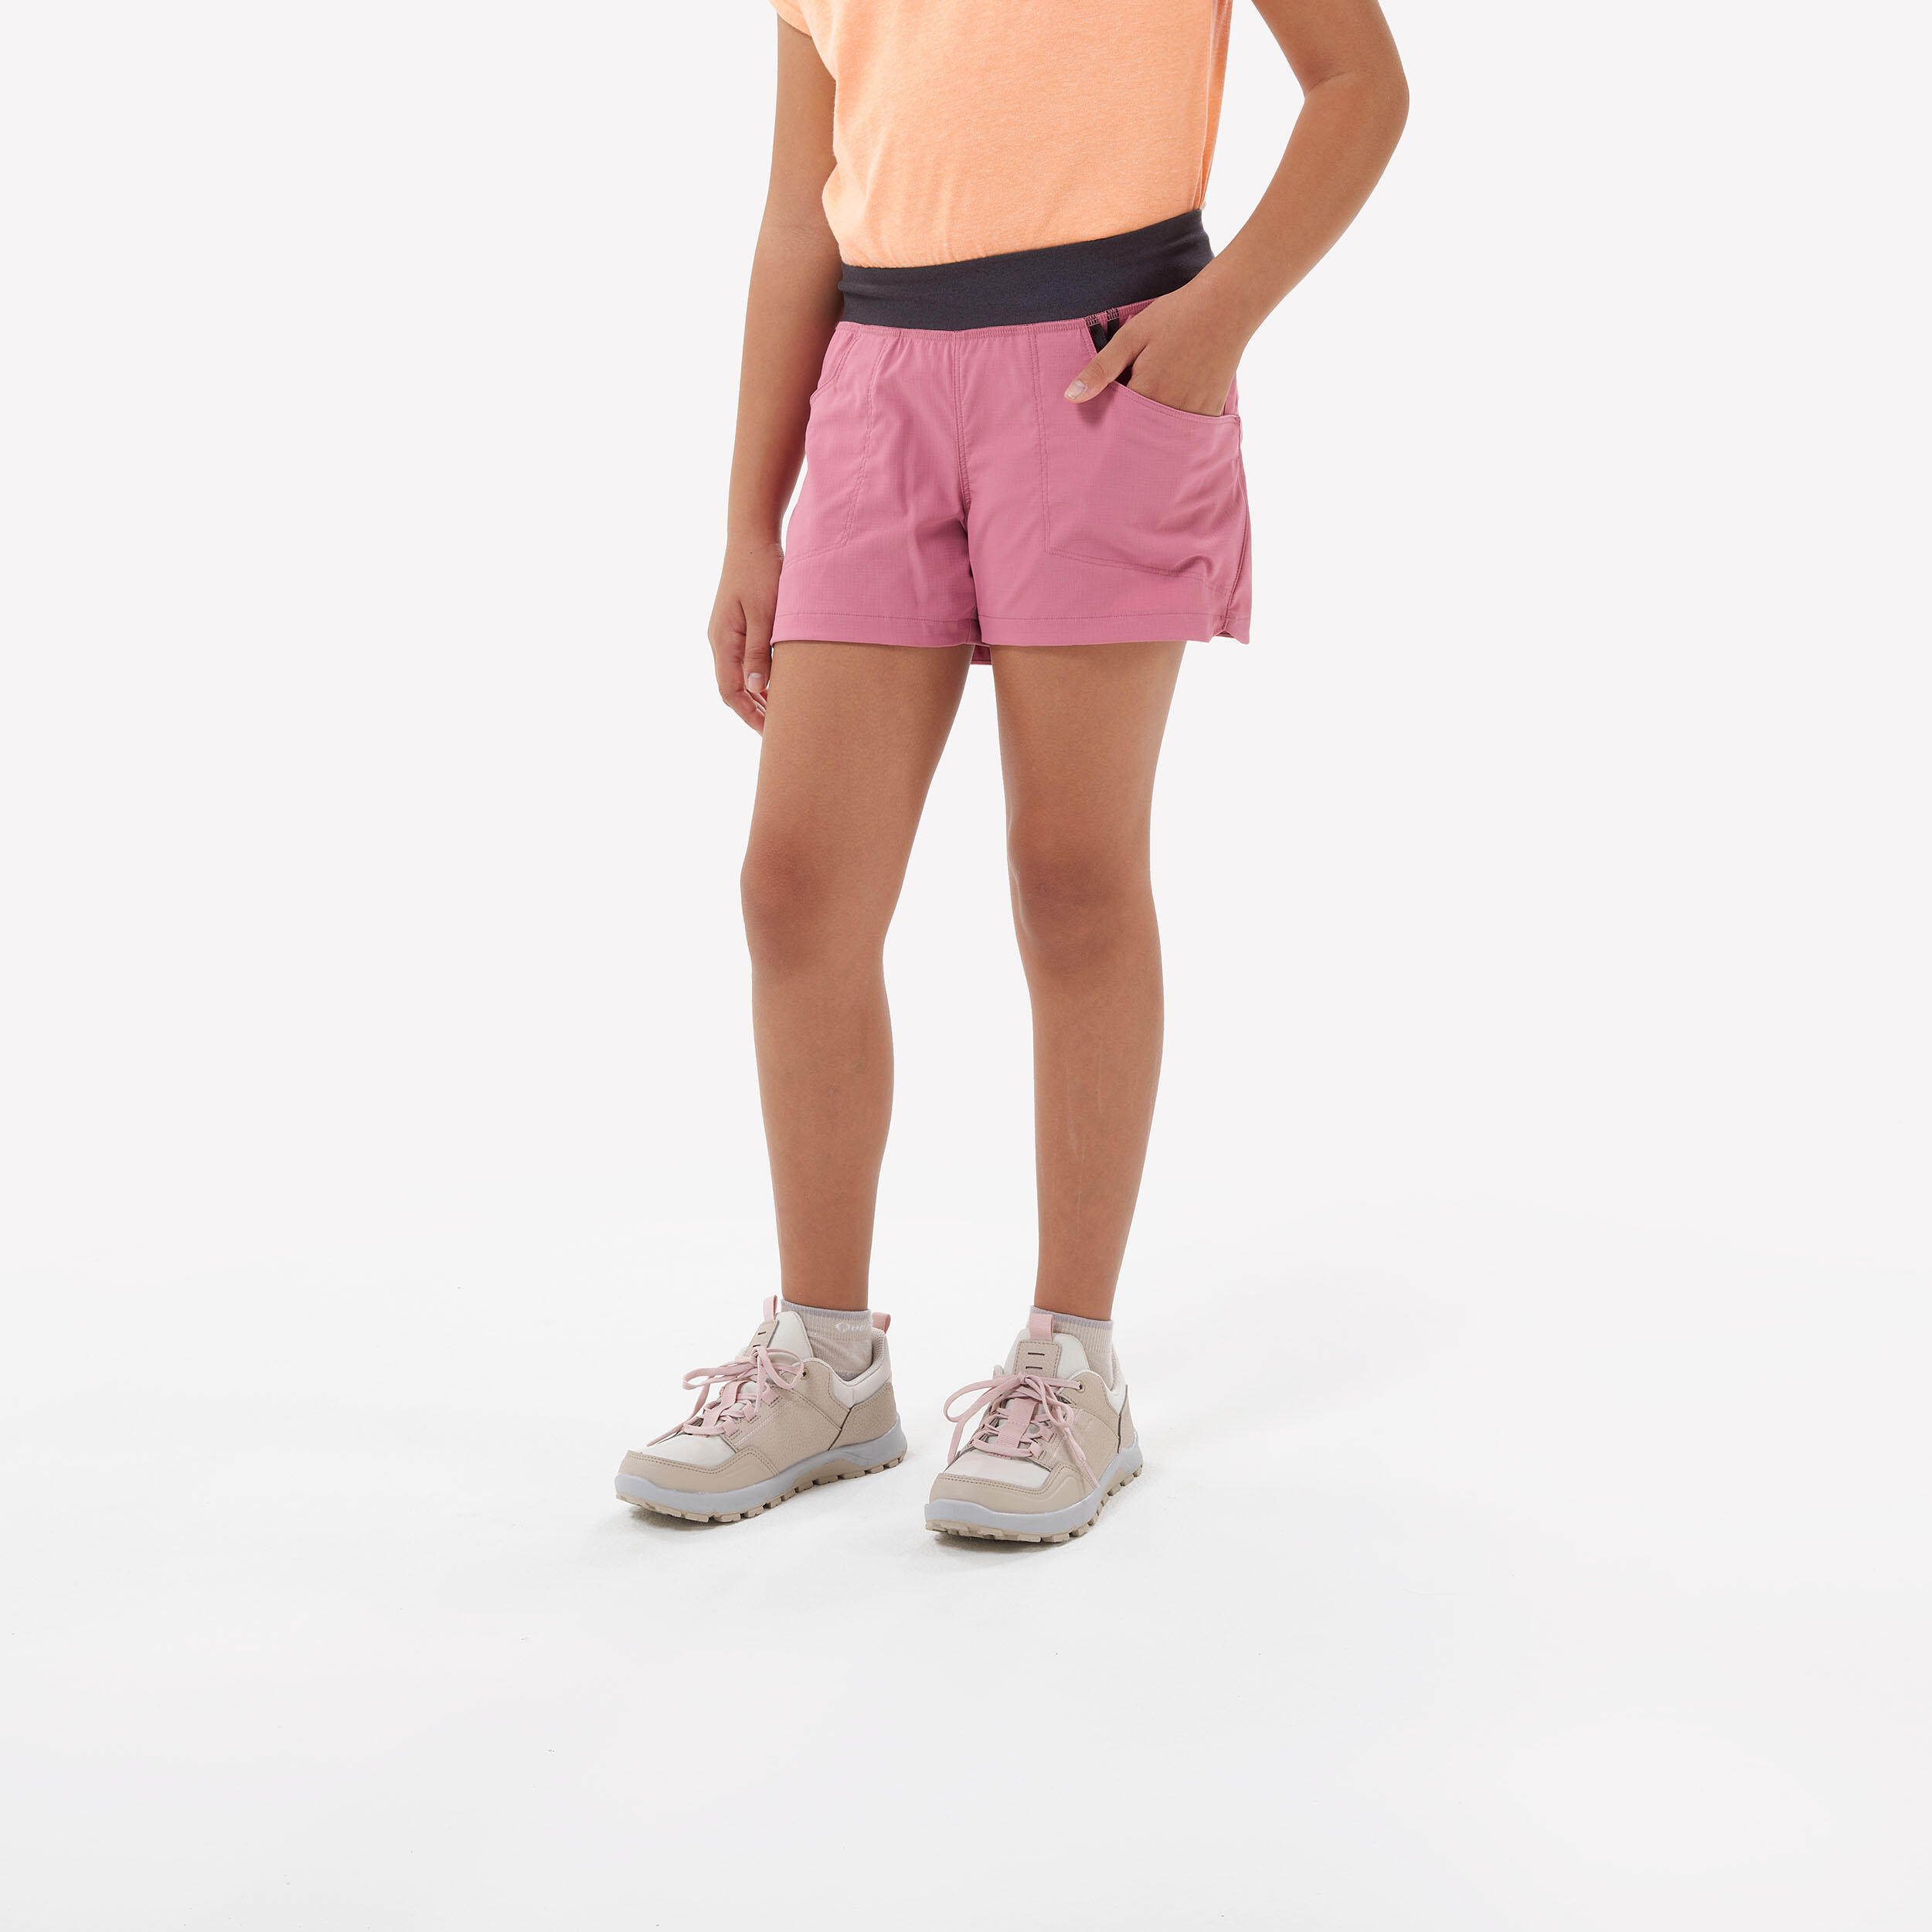 QUECHUA Kids’ Hiking Shorts - MH500 Ages 7-15 - Pink